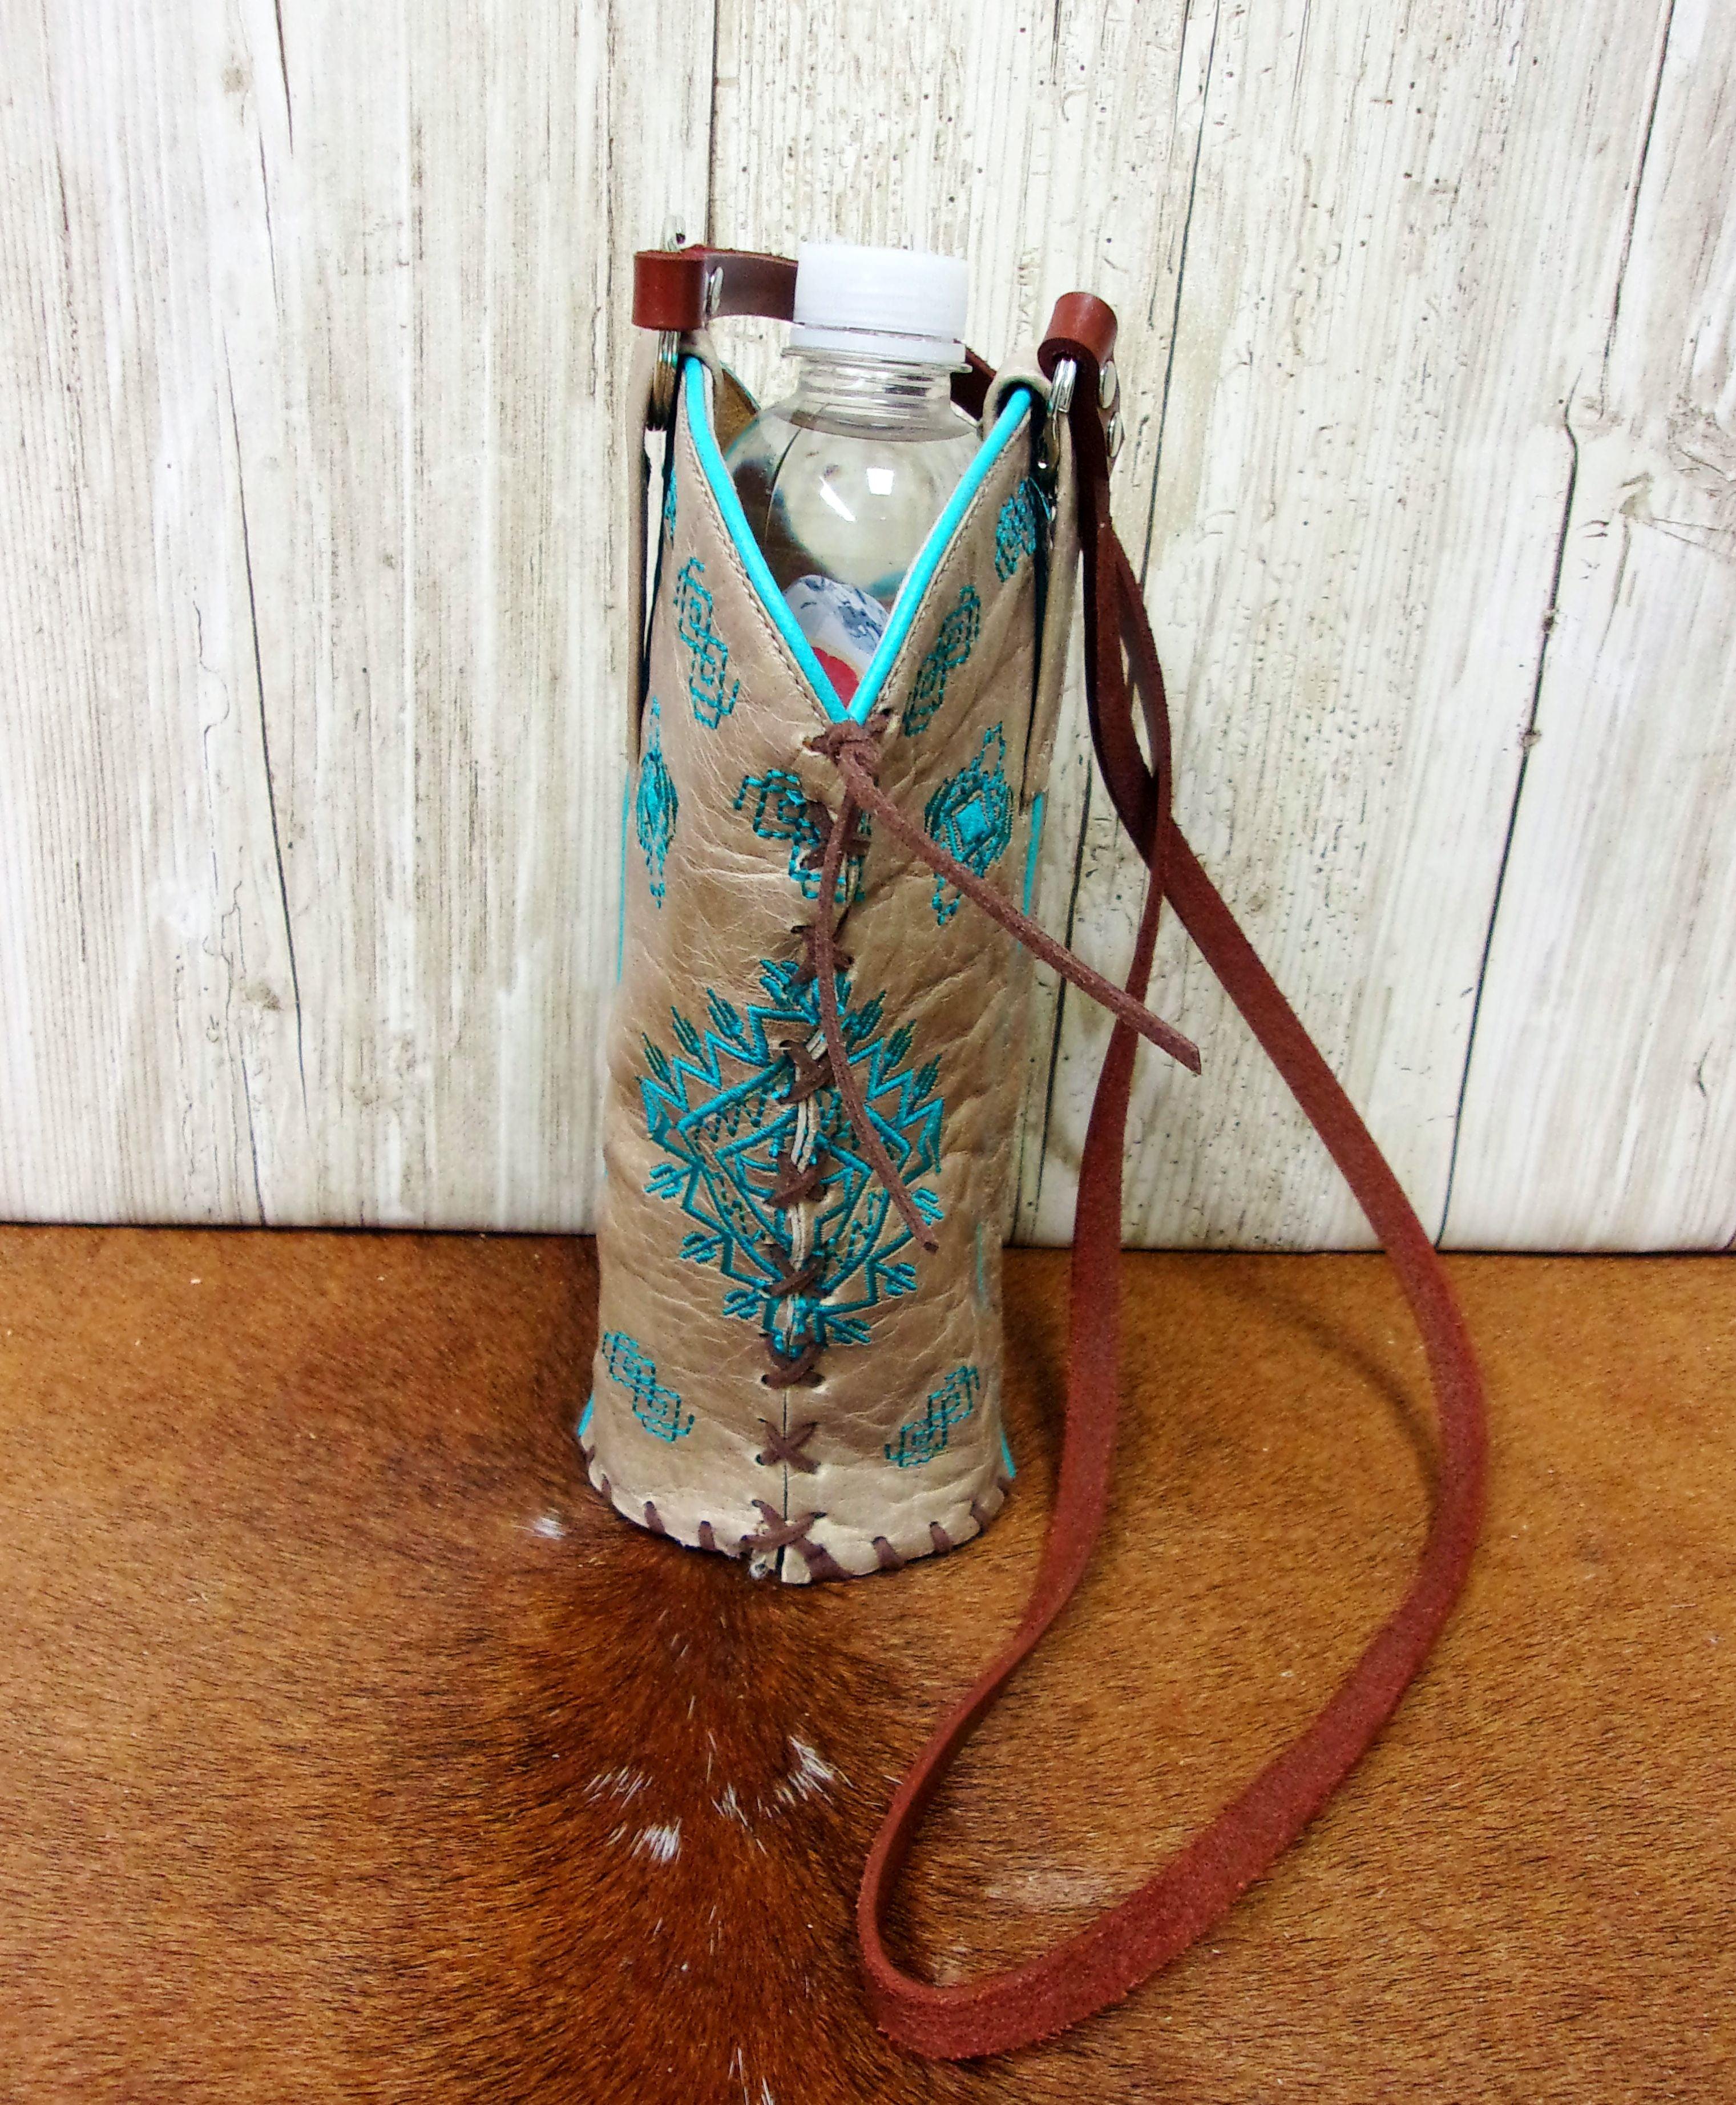 Cowboy Boot Water Bottle Tote - Bottle Caddy - Leather Bottle Holder WA19 cowboy boot purses, western fringe purse, handmade leather purses, boot purse, handmade western purse, custom leather handbags Chris Thompson Bags